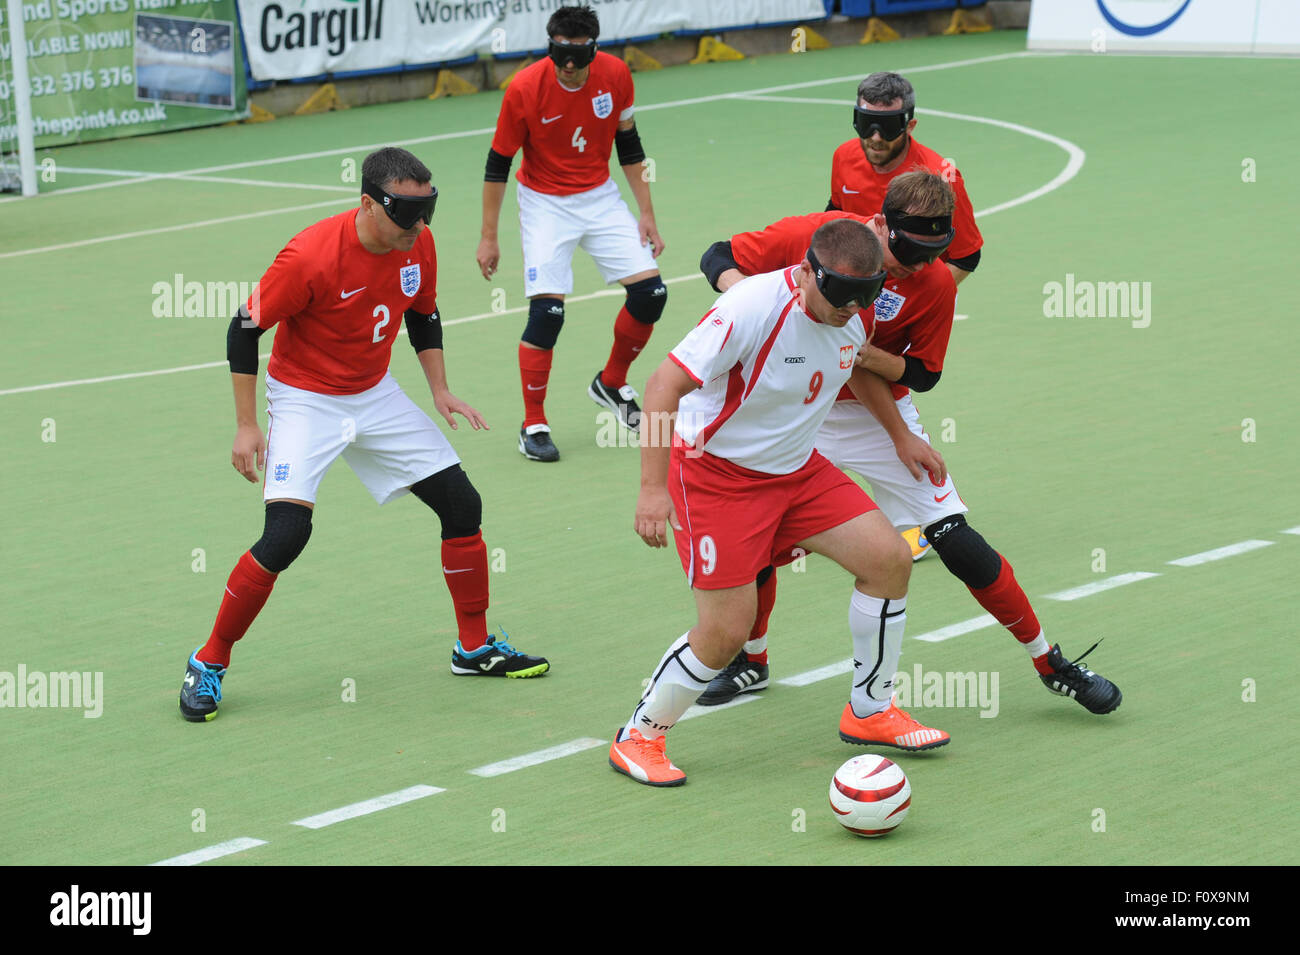 Hereford, UK. 22nd August, 2015. The IBSA Blind Football European Championships 2015 at Point 4, Hereford. England v Poland - generic match action. Credit:  James Maggs/Alamy Live News Stock Photo